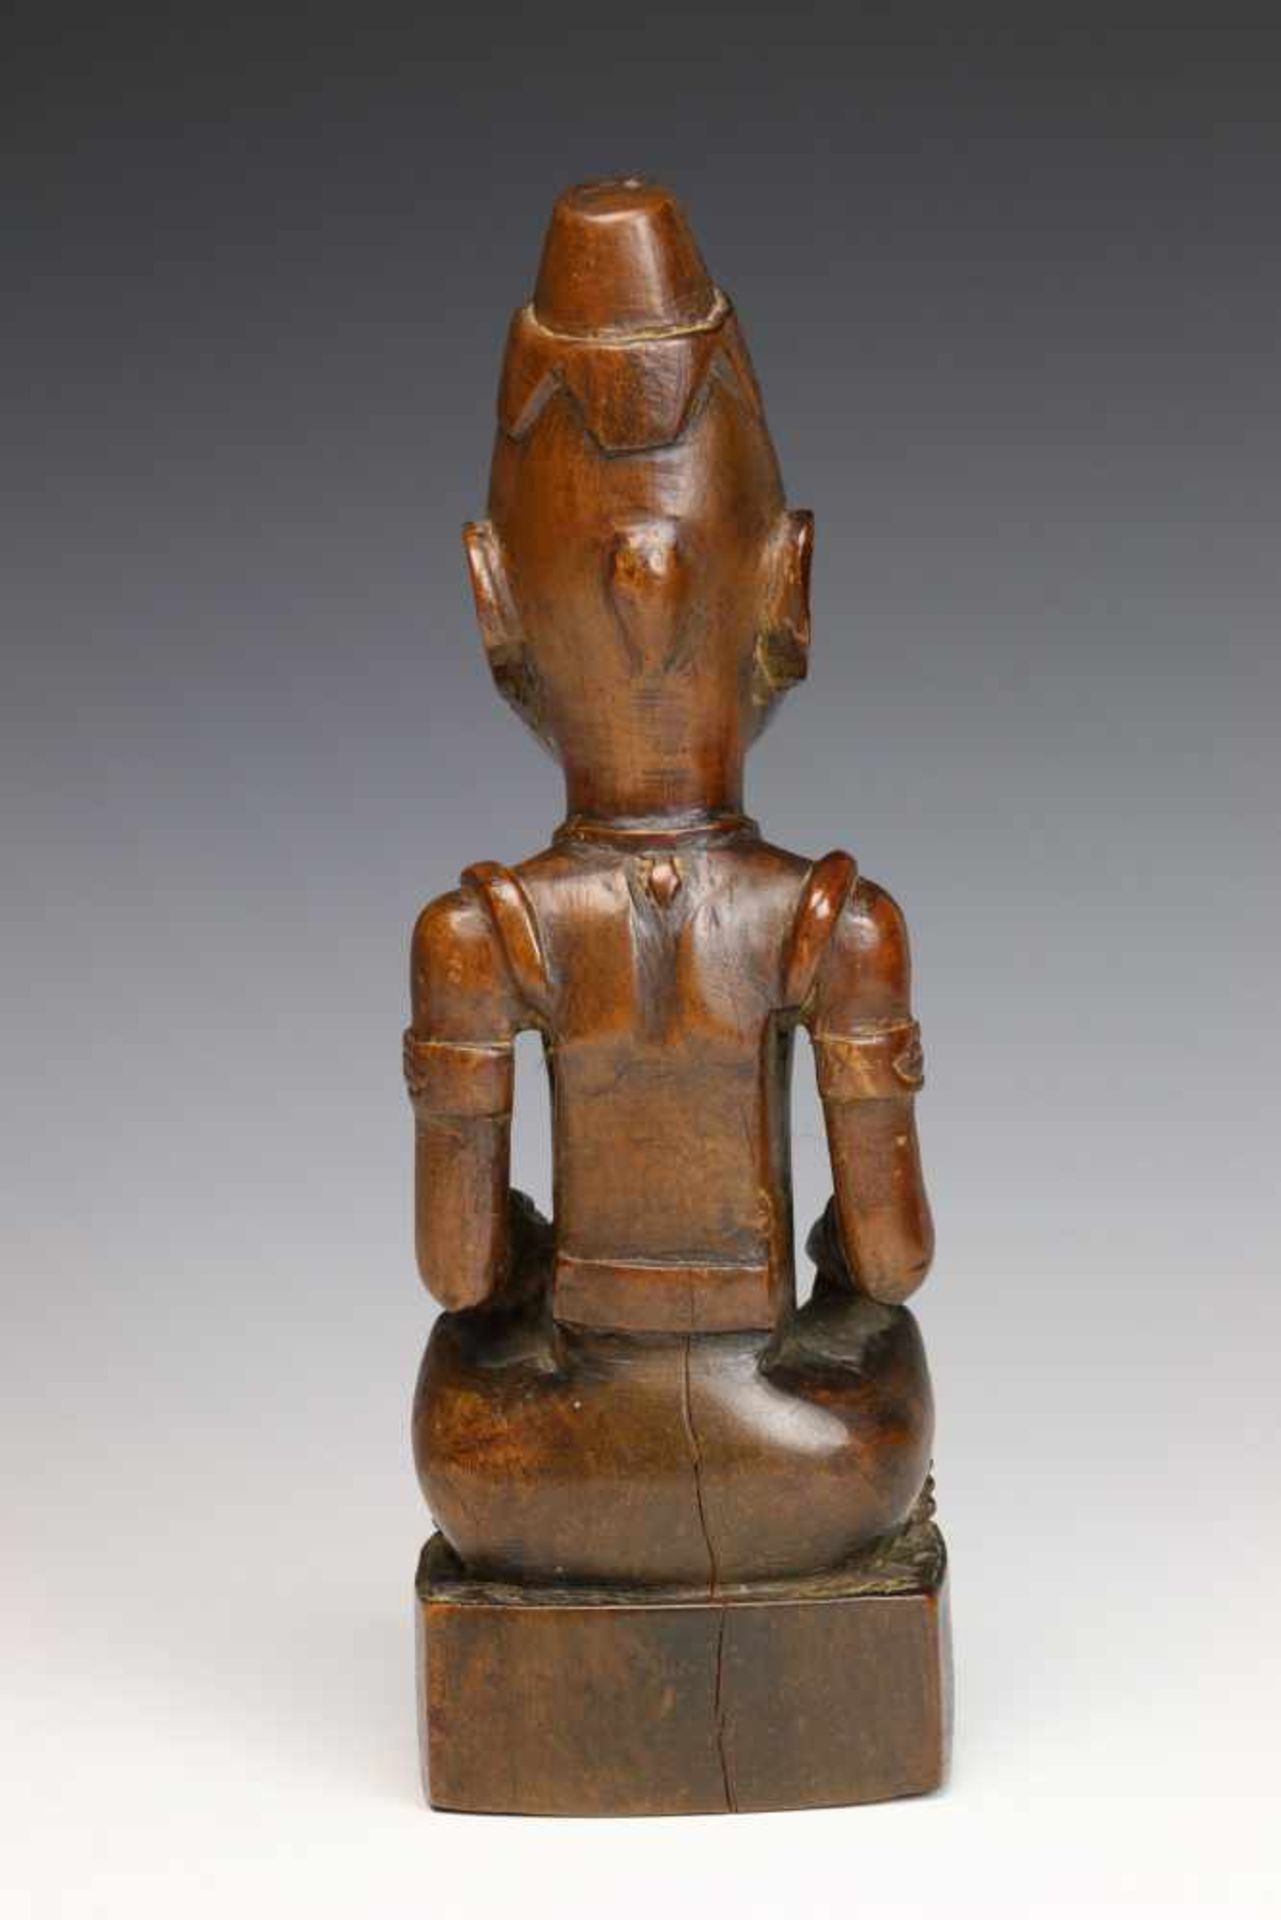 DRC., Kuba, small wooden carved King's figure, ca. 1920.Carved in the style of the great Ndop - Bild 3 aus 5